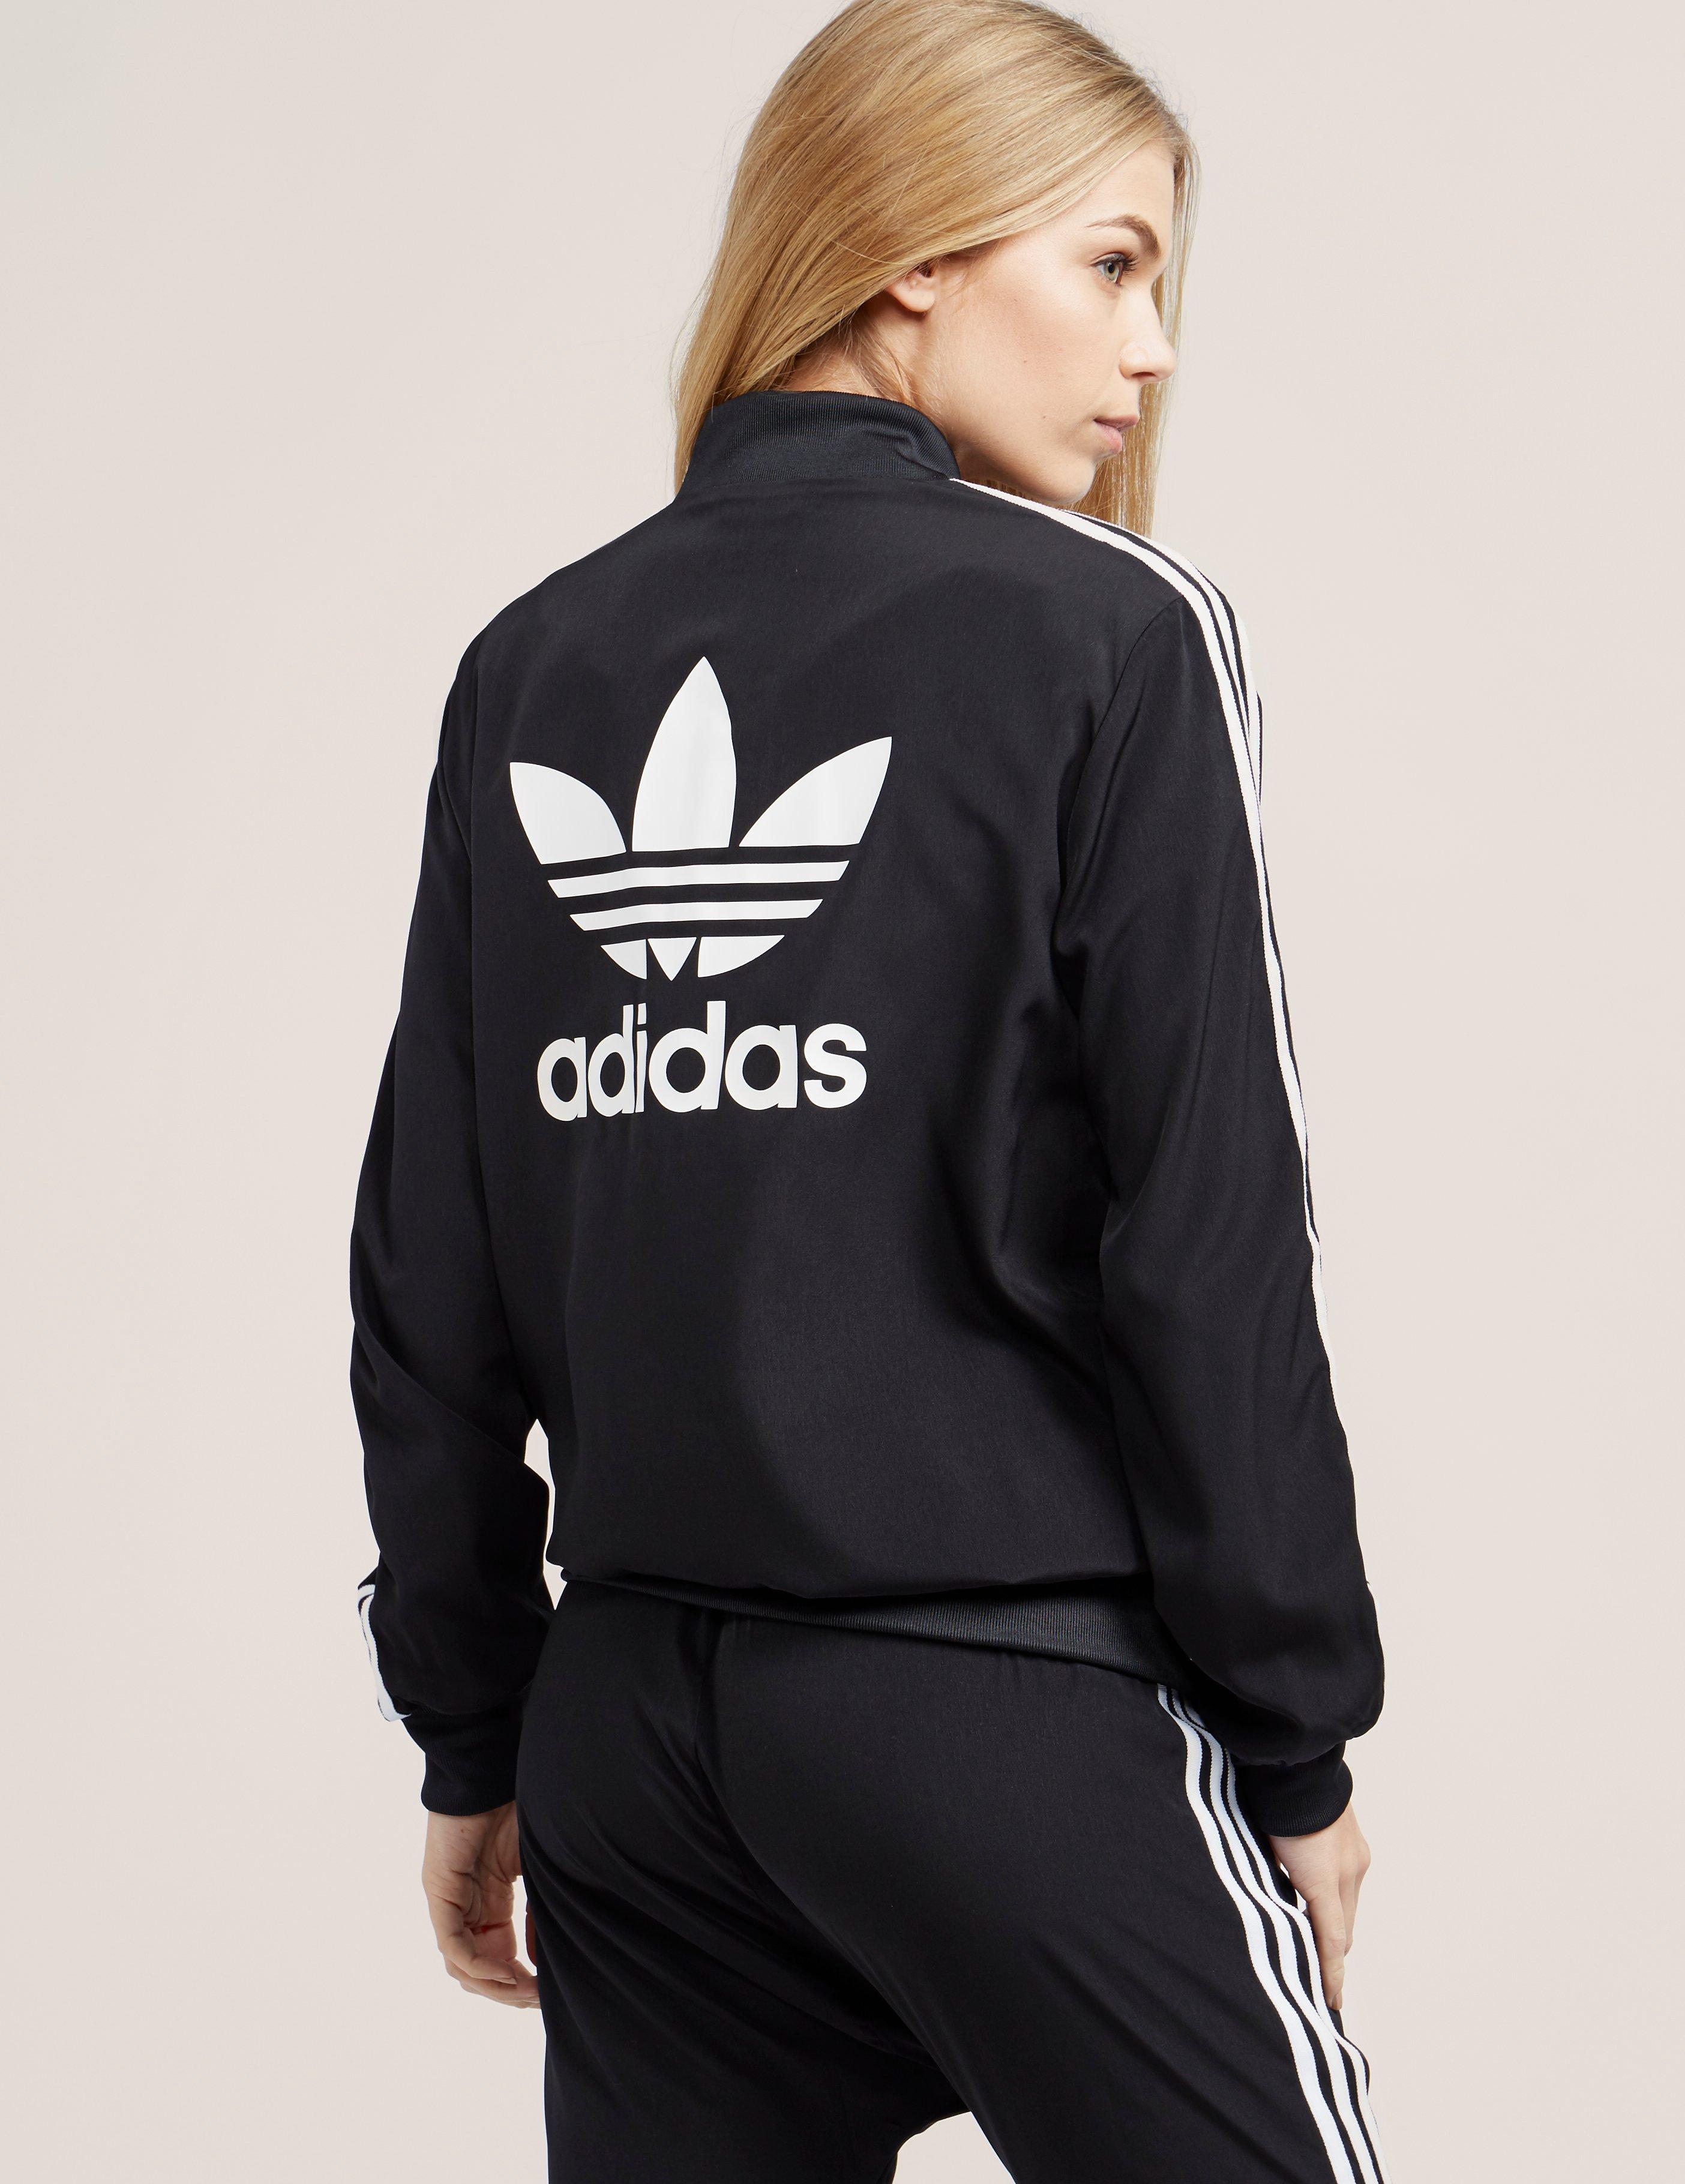 adidas Originals Synthetic 3-stripes Bomber Jacket in Black | Lyst